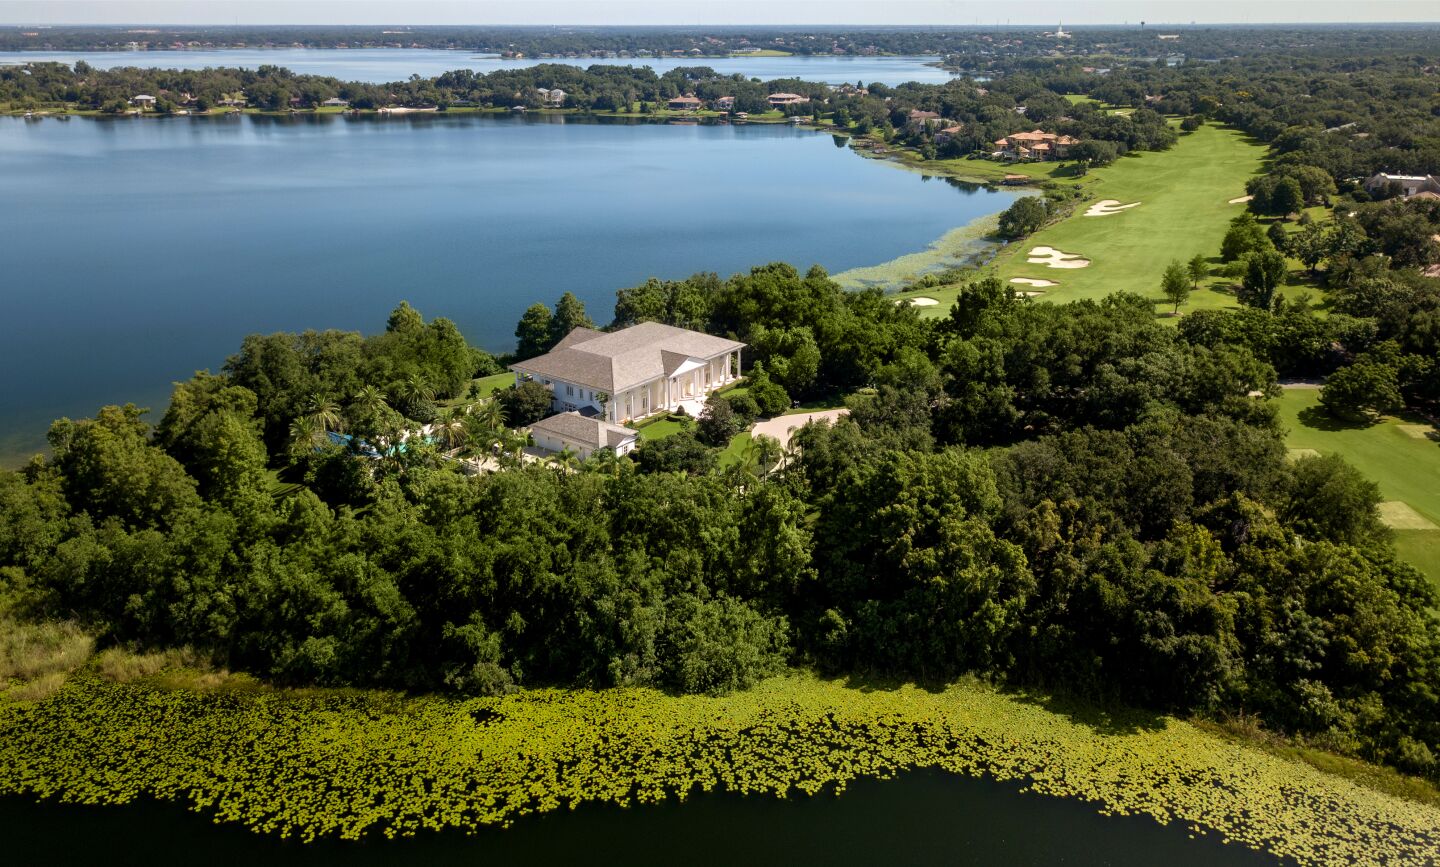 An aerial view of the waterfront home on a peninsula and alongside the greens and sand traps of a golf course.